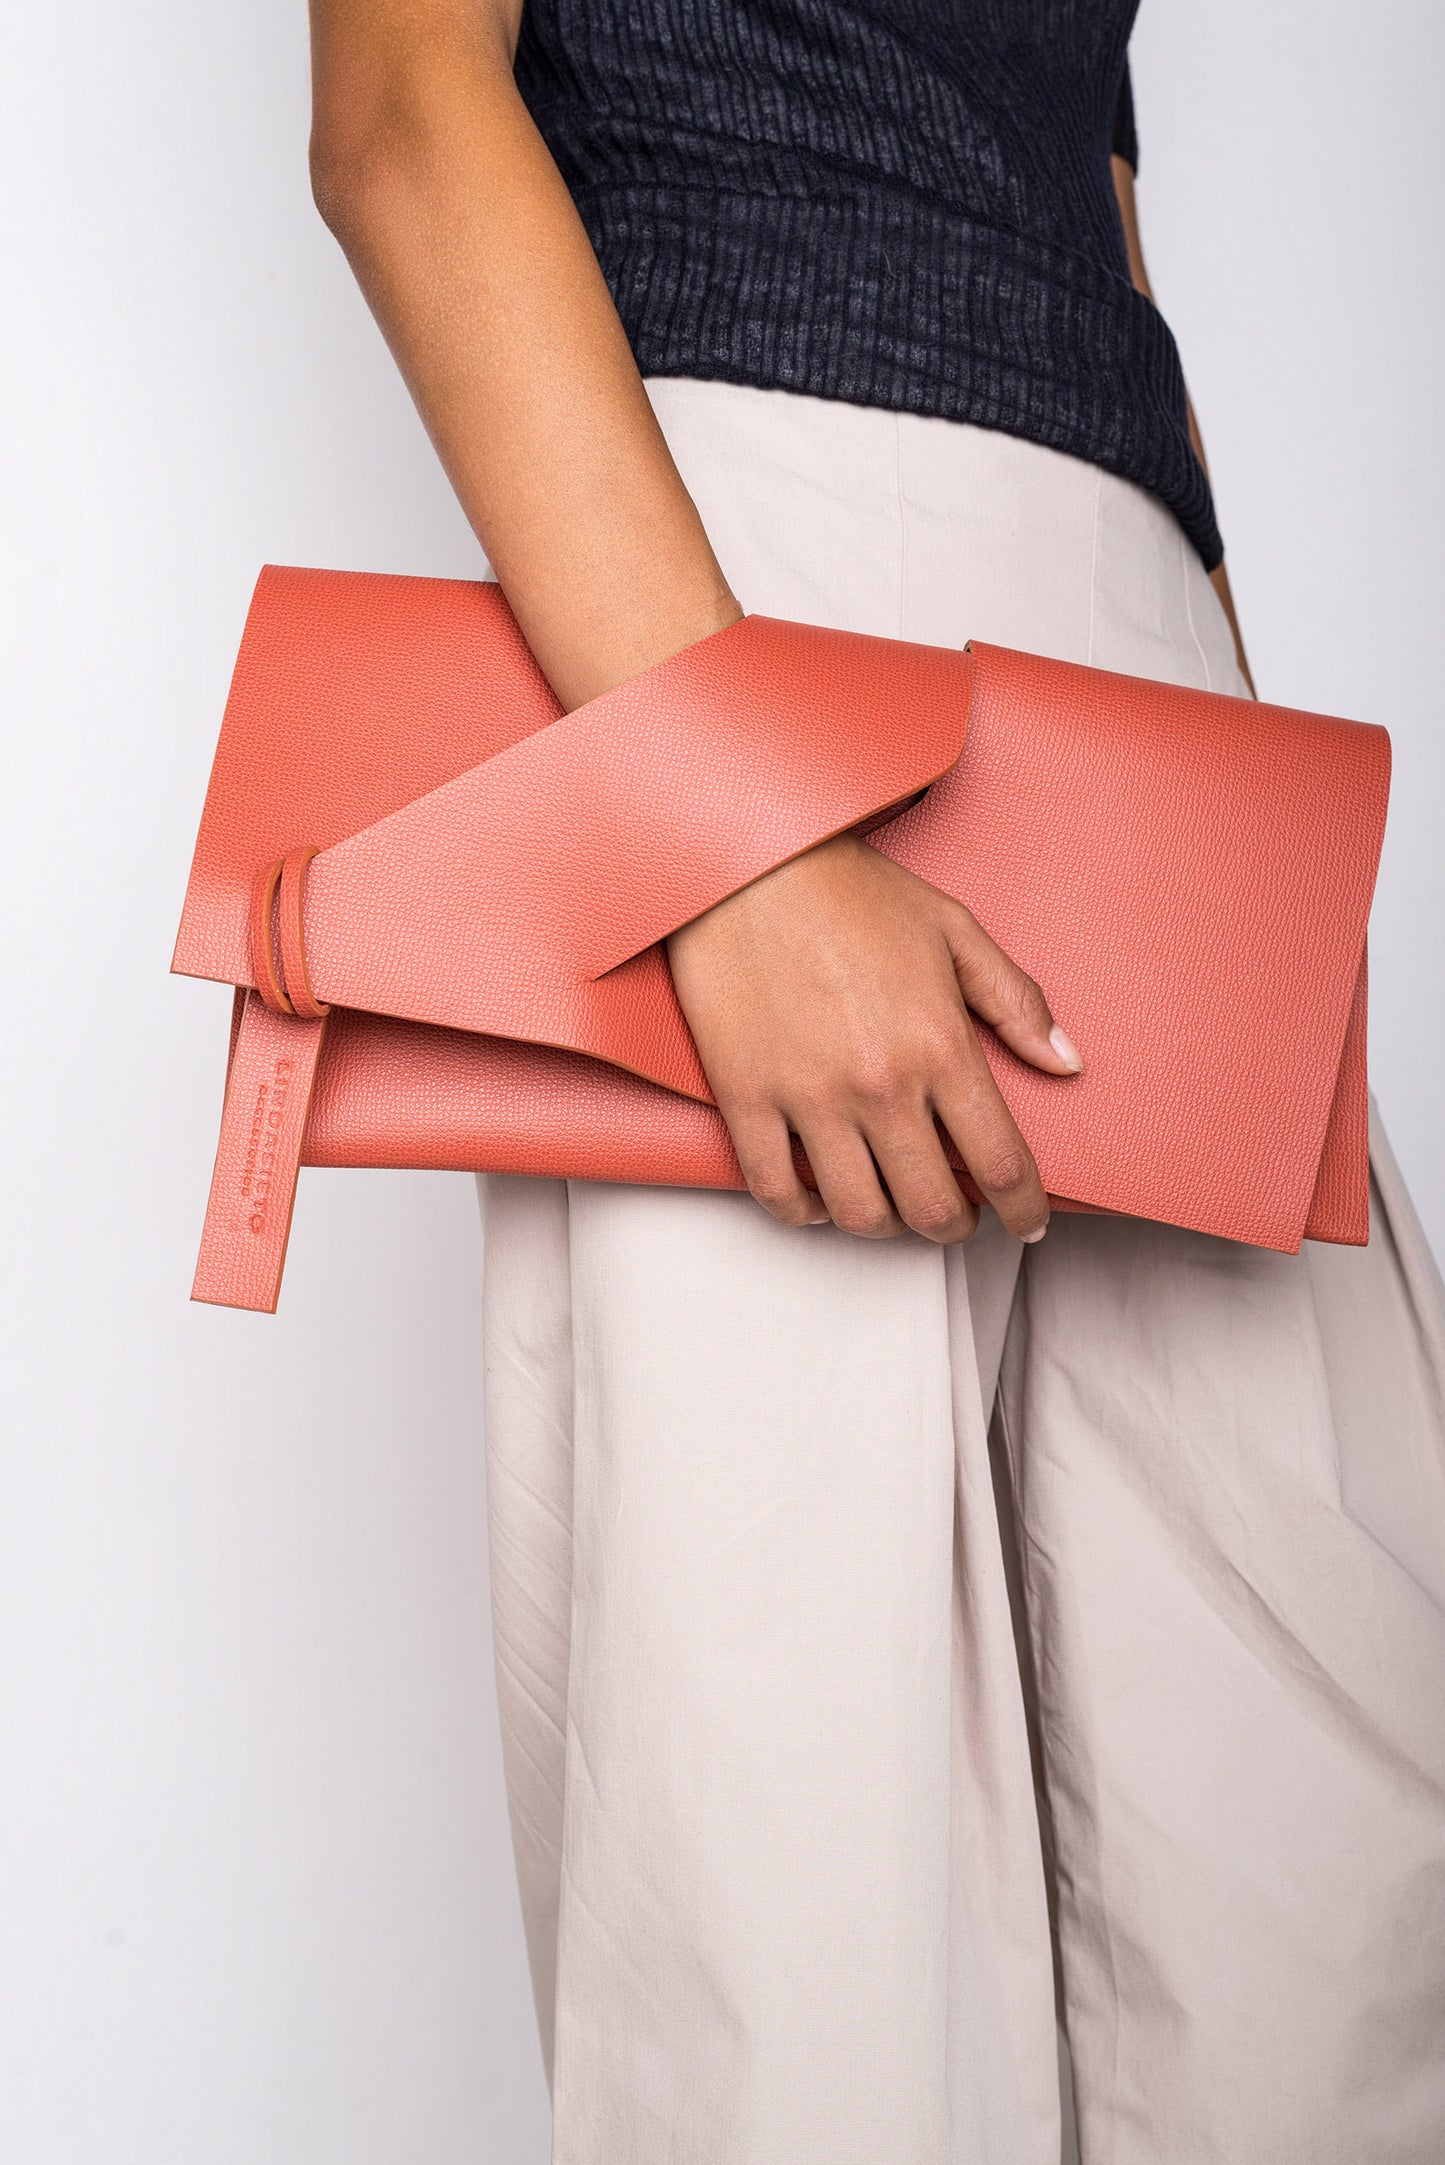 Fragmented Envelope Clutch + Colour Options